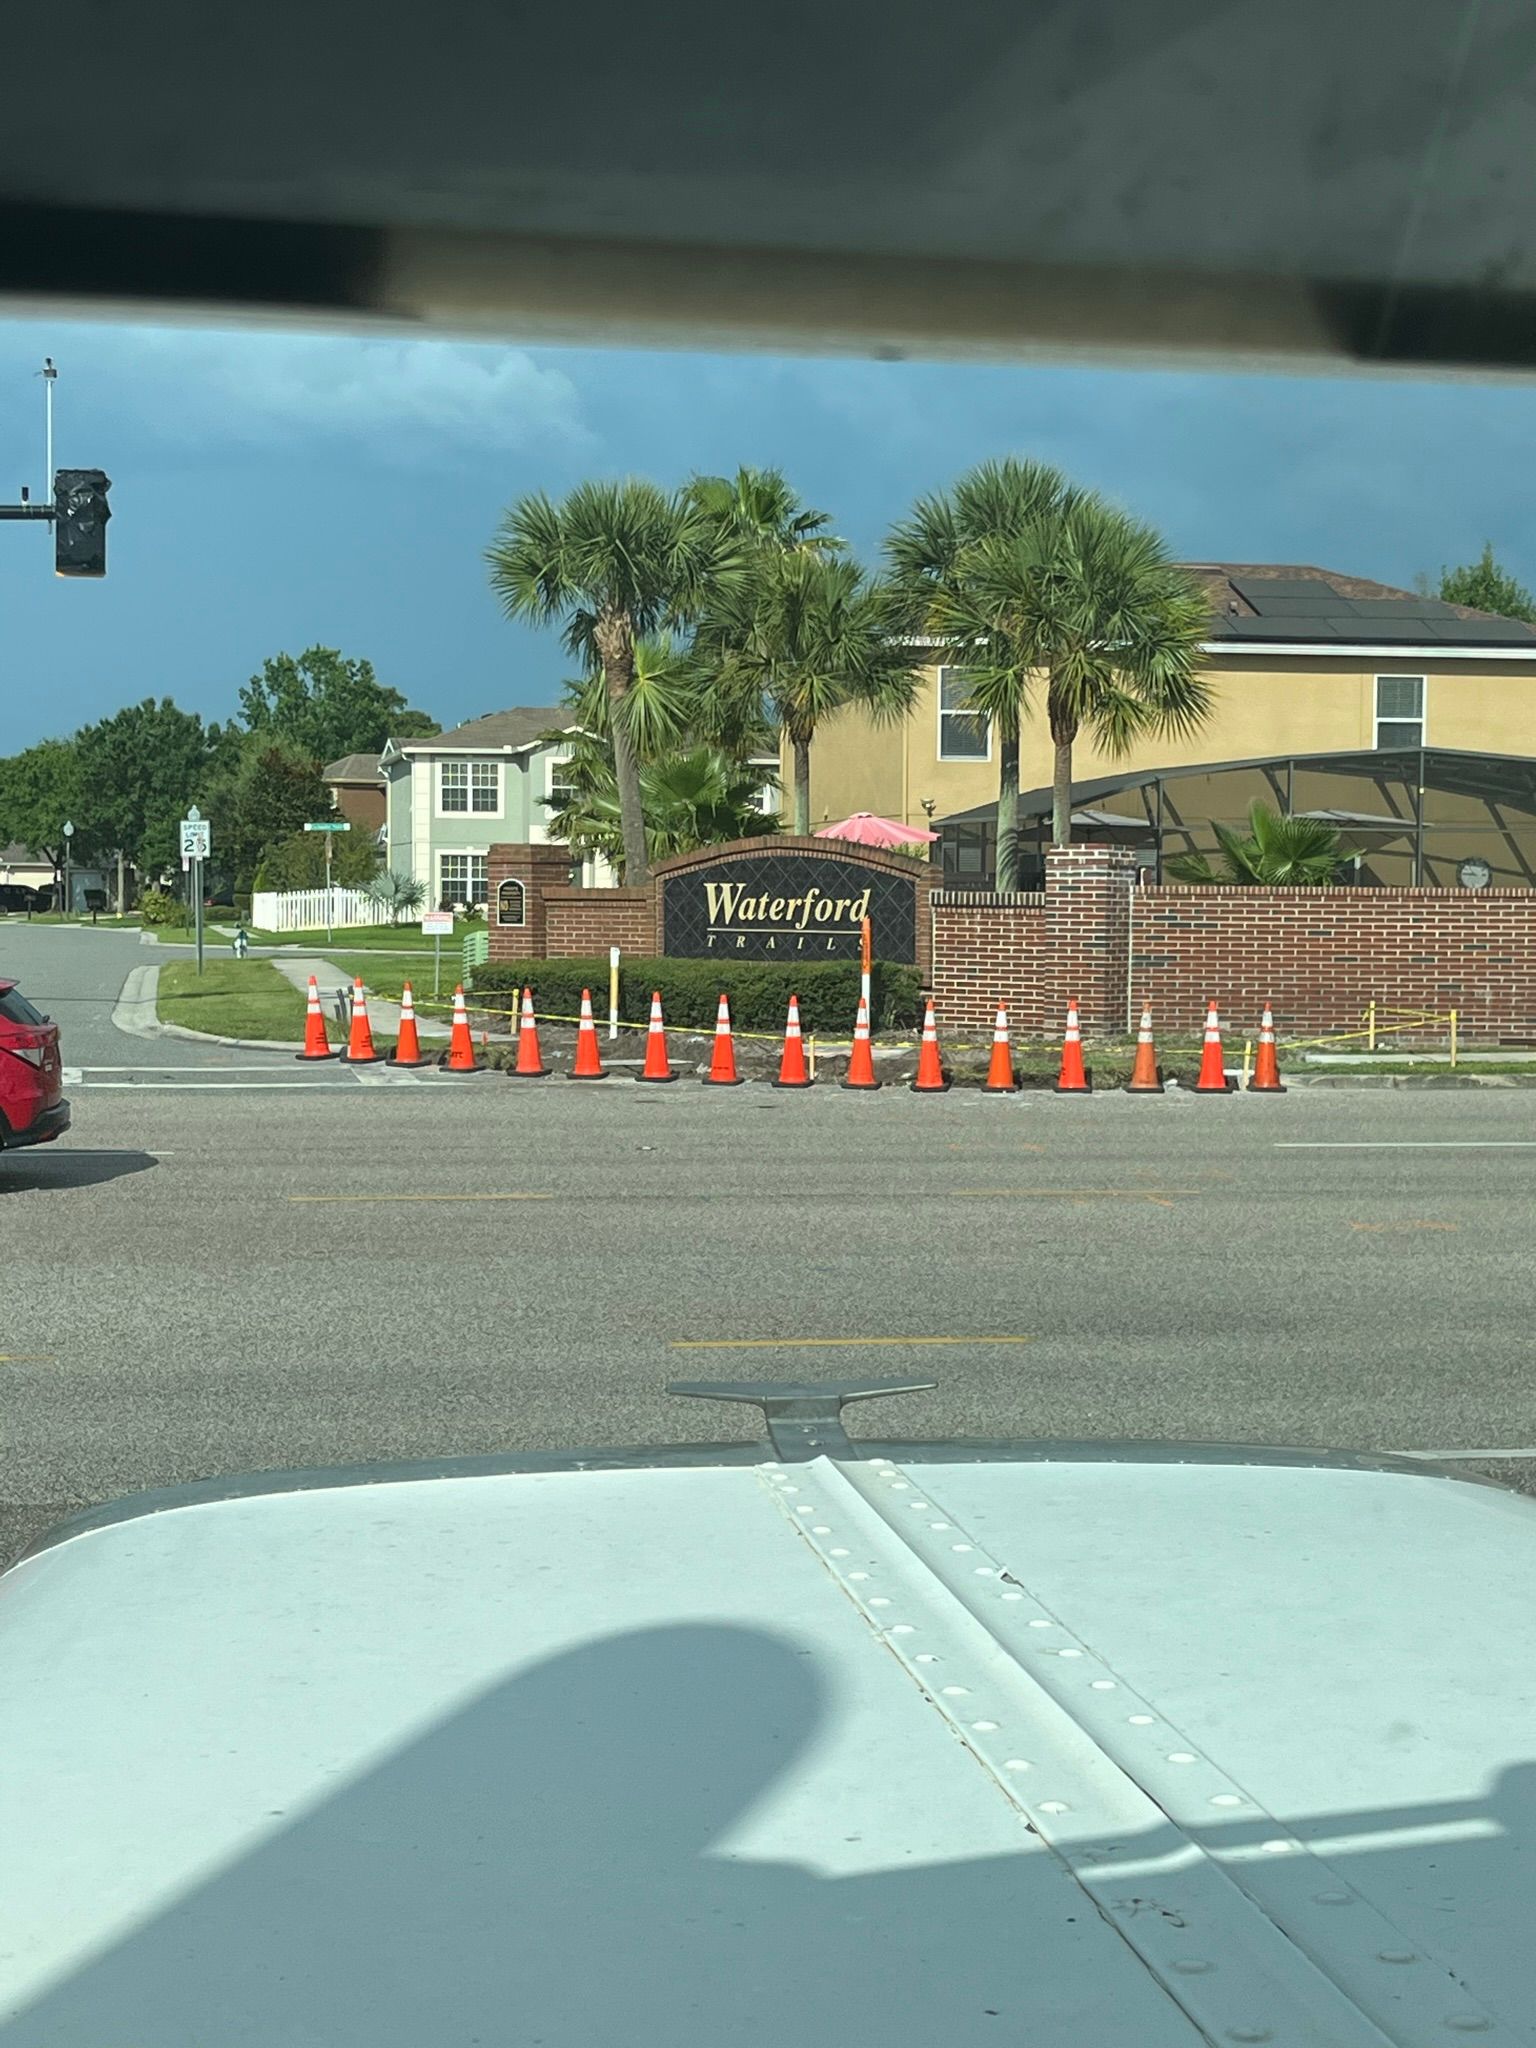 A car is driving down a street with a lot of traffic cones